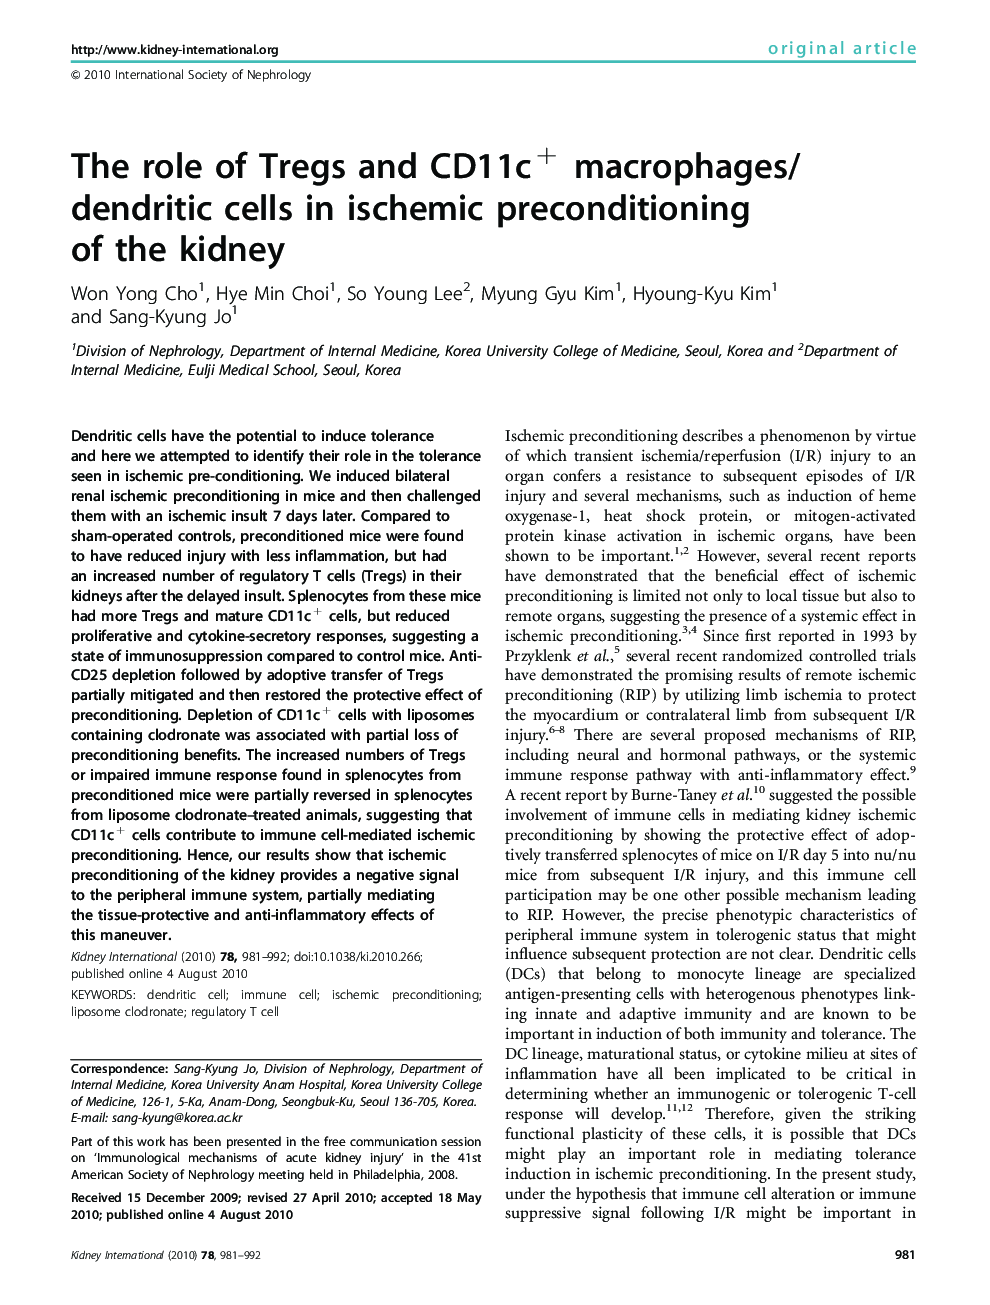 The role of Tregs and CD11c+ macrophages/dendritic cells in ischemic preconditioning of the kidney 